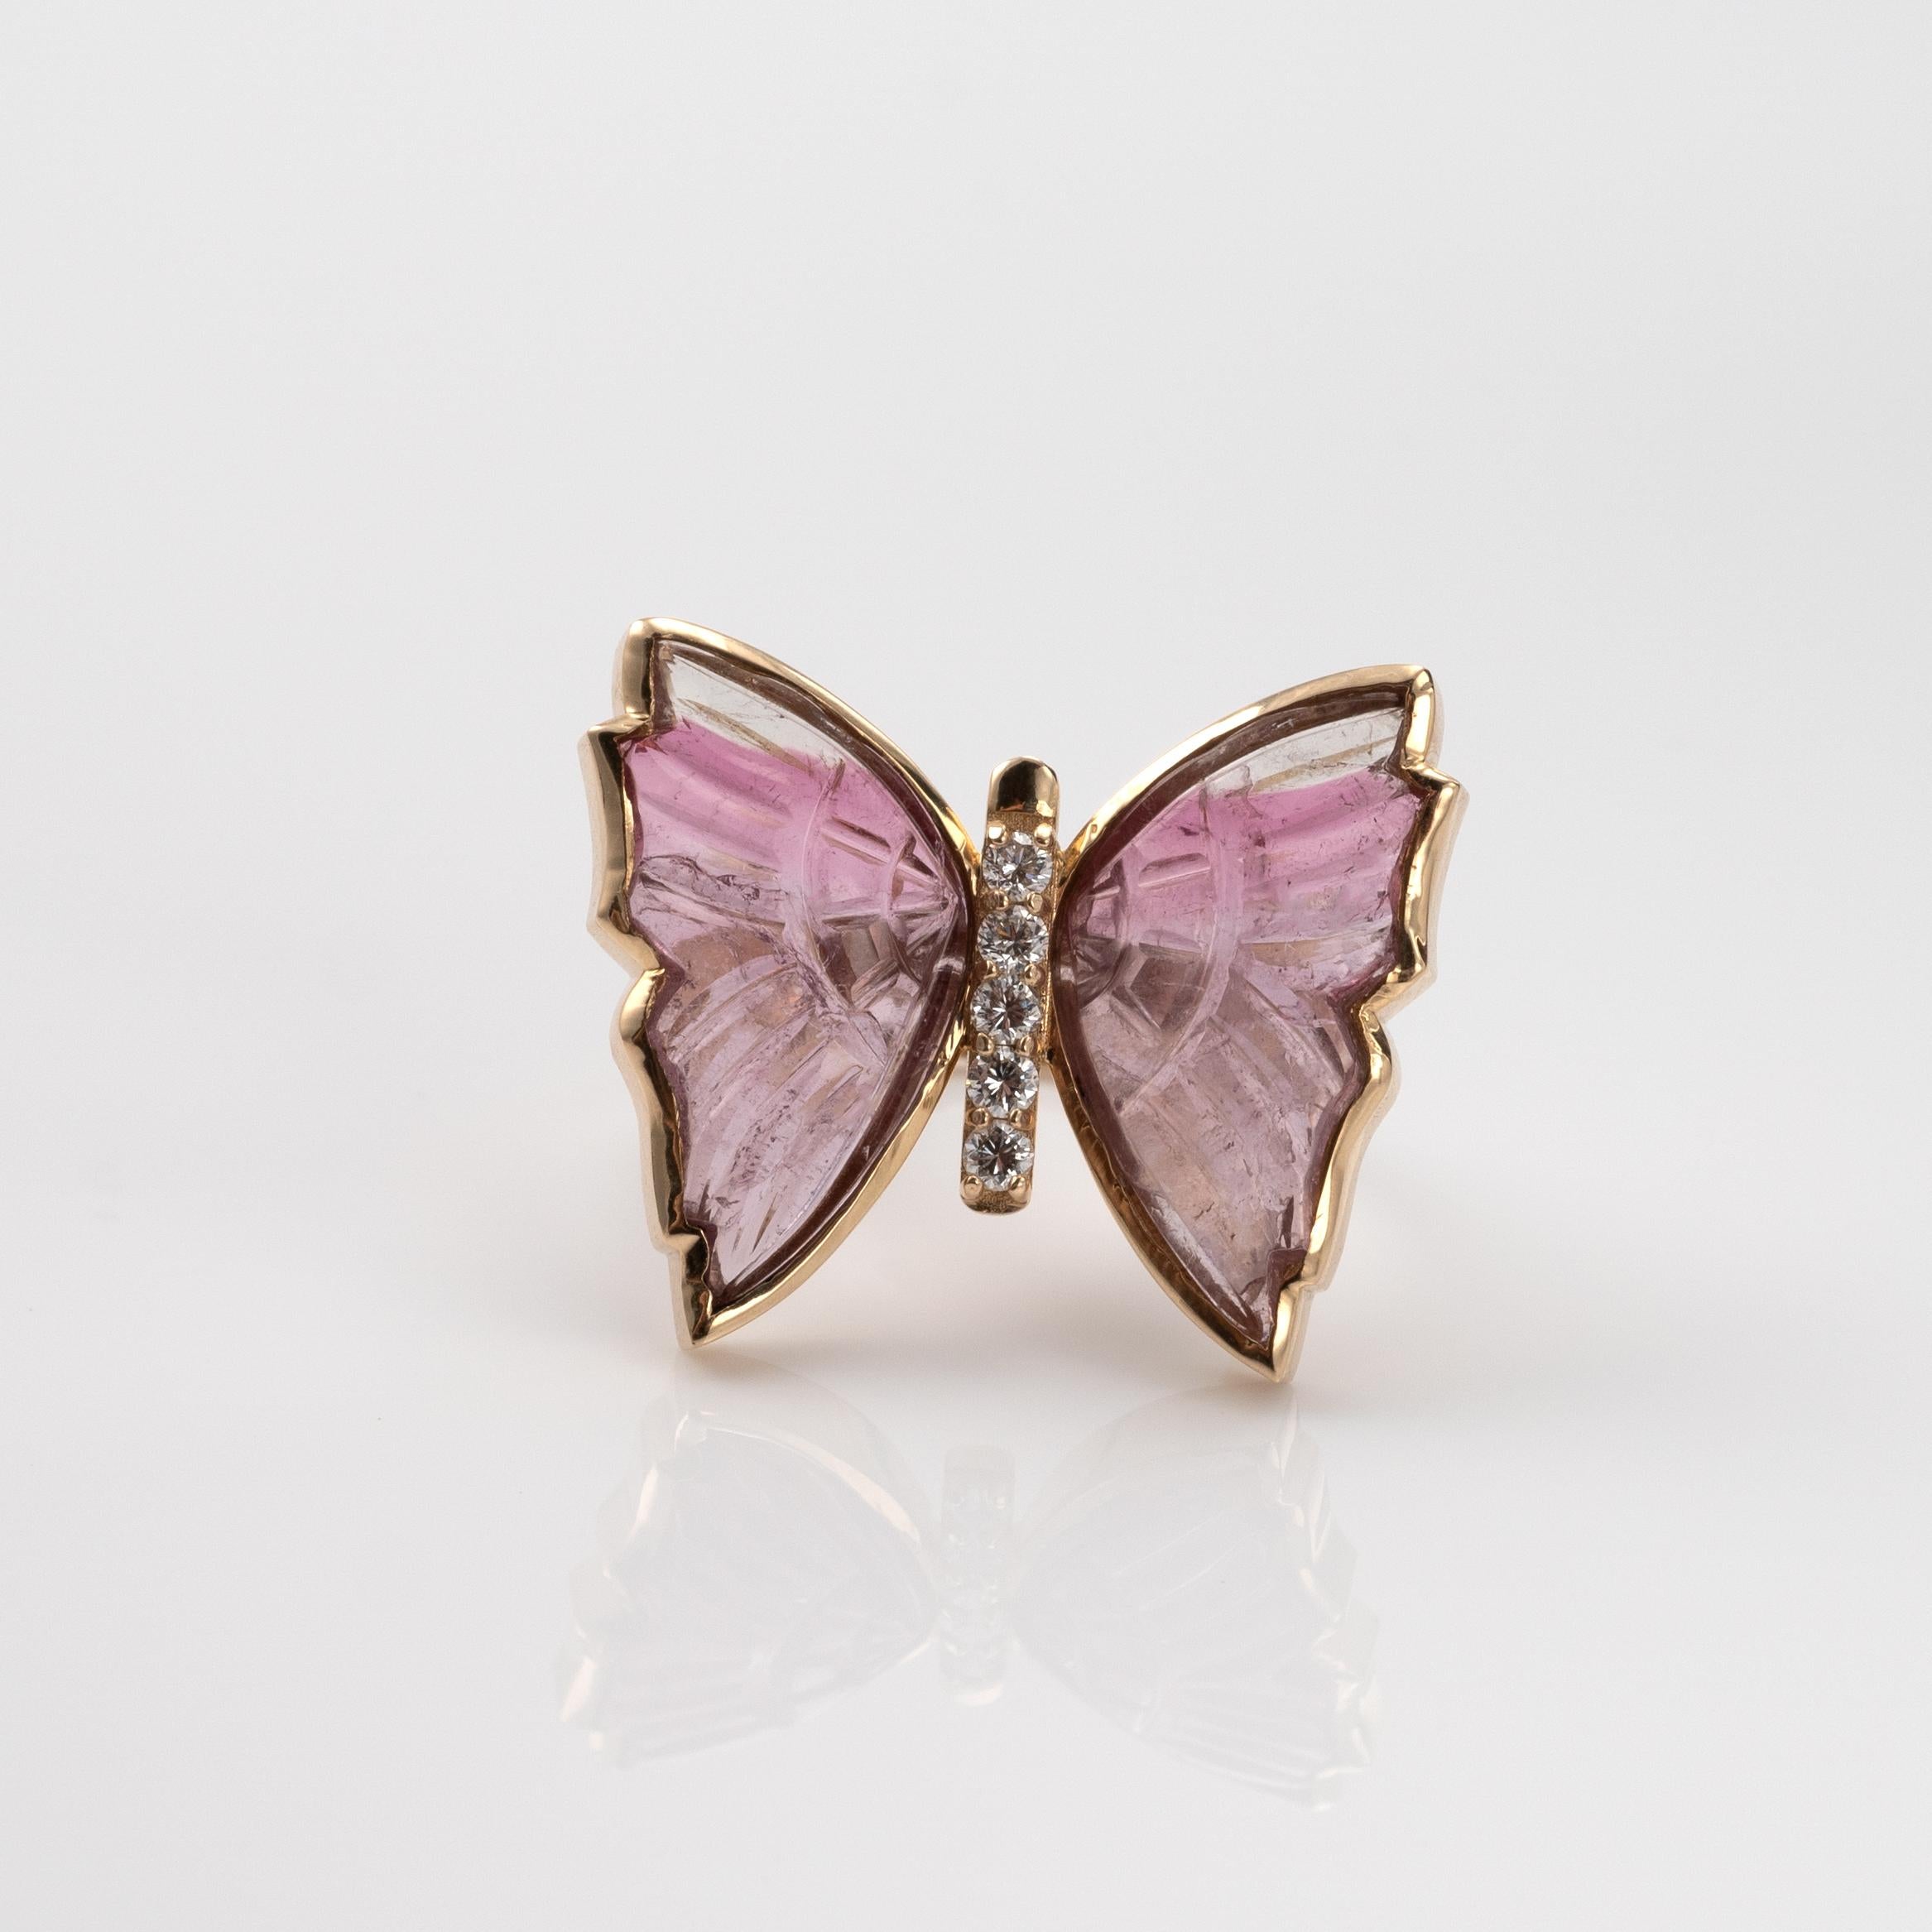 Round Cut Pink Tourmaline Butterfly Ring with Diamonds, Crafted in 14 Karat Yellow Gold